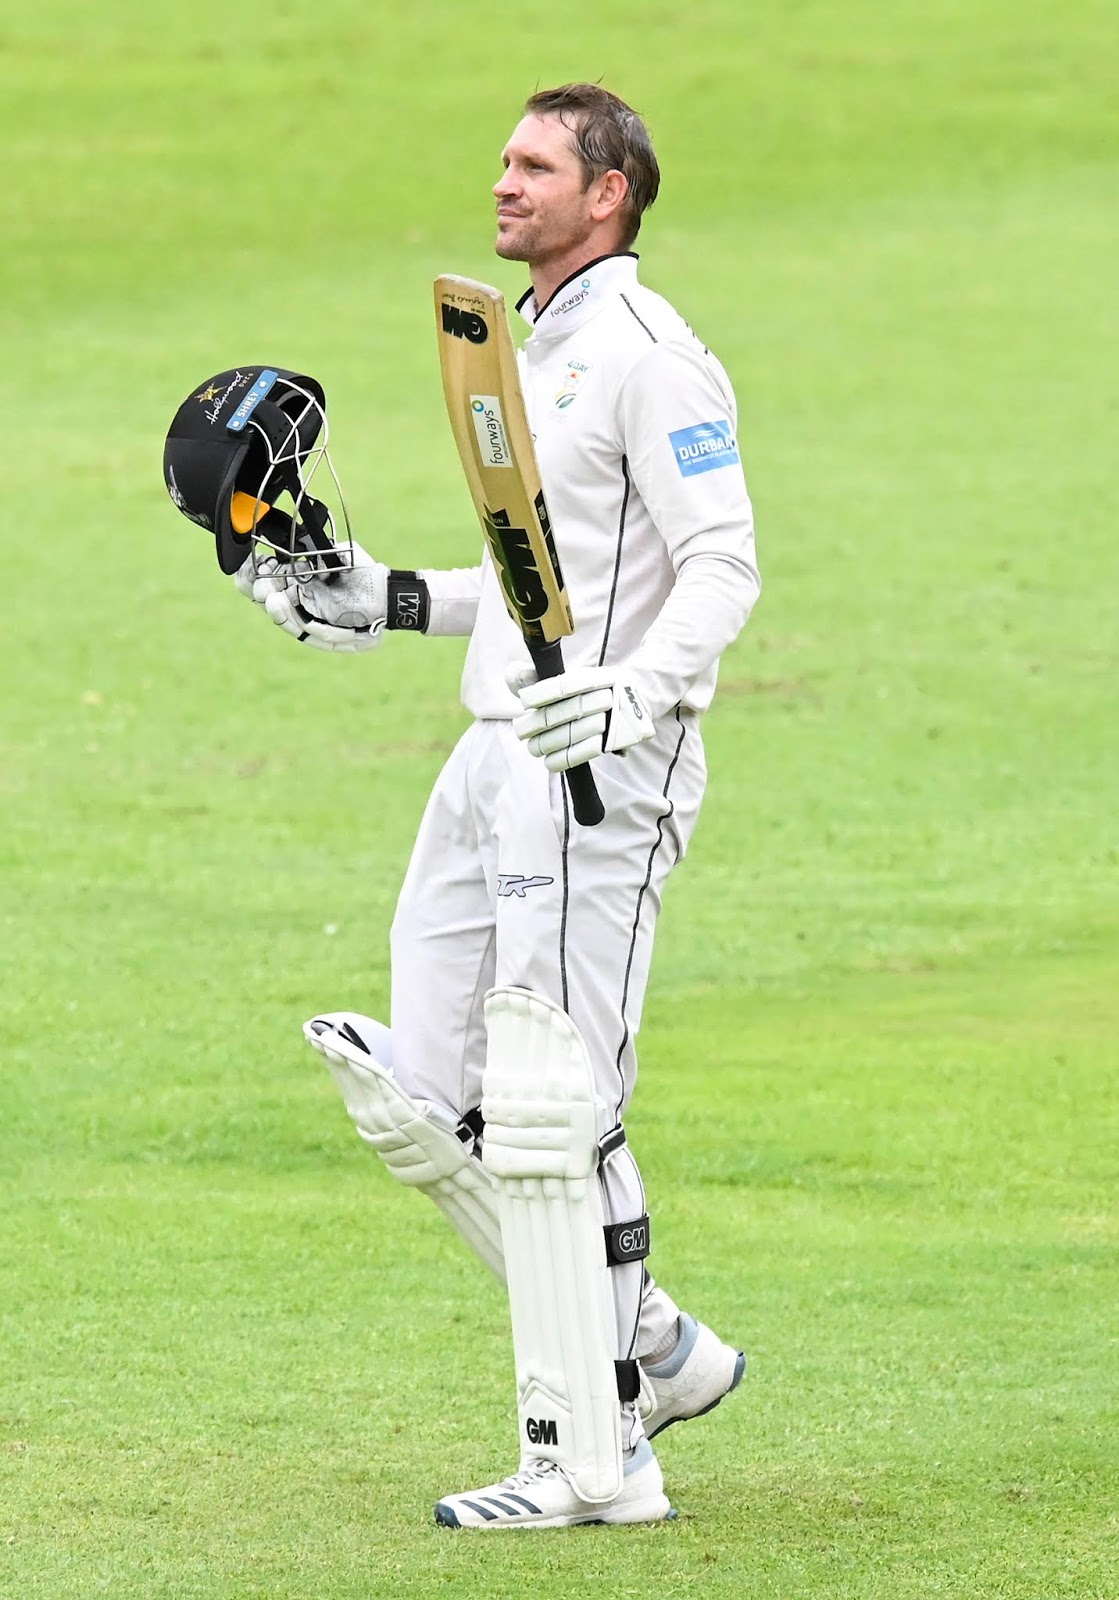 Sarel Erwee - Raising his bat after scoring a century for the Hollywoodbets Dolphins in their 4-Day clash with the VKB Knights